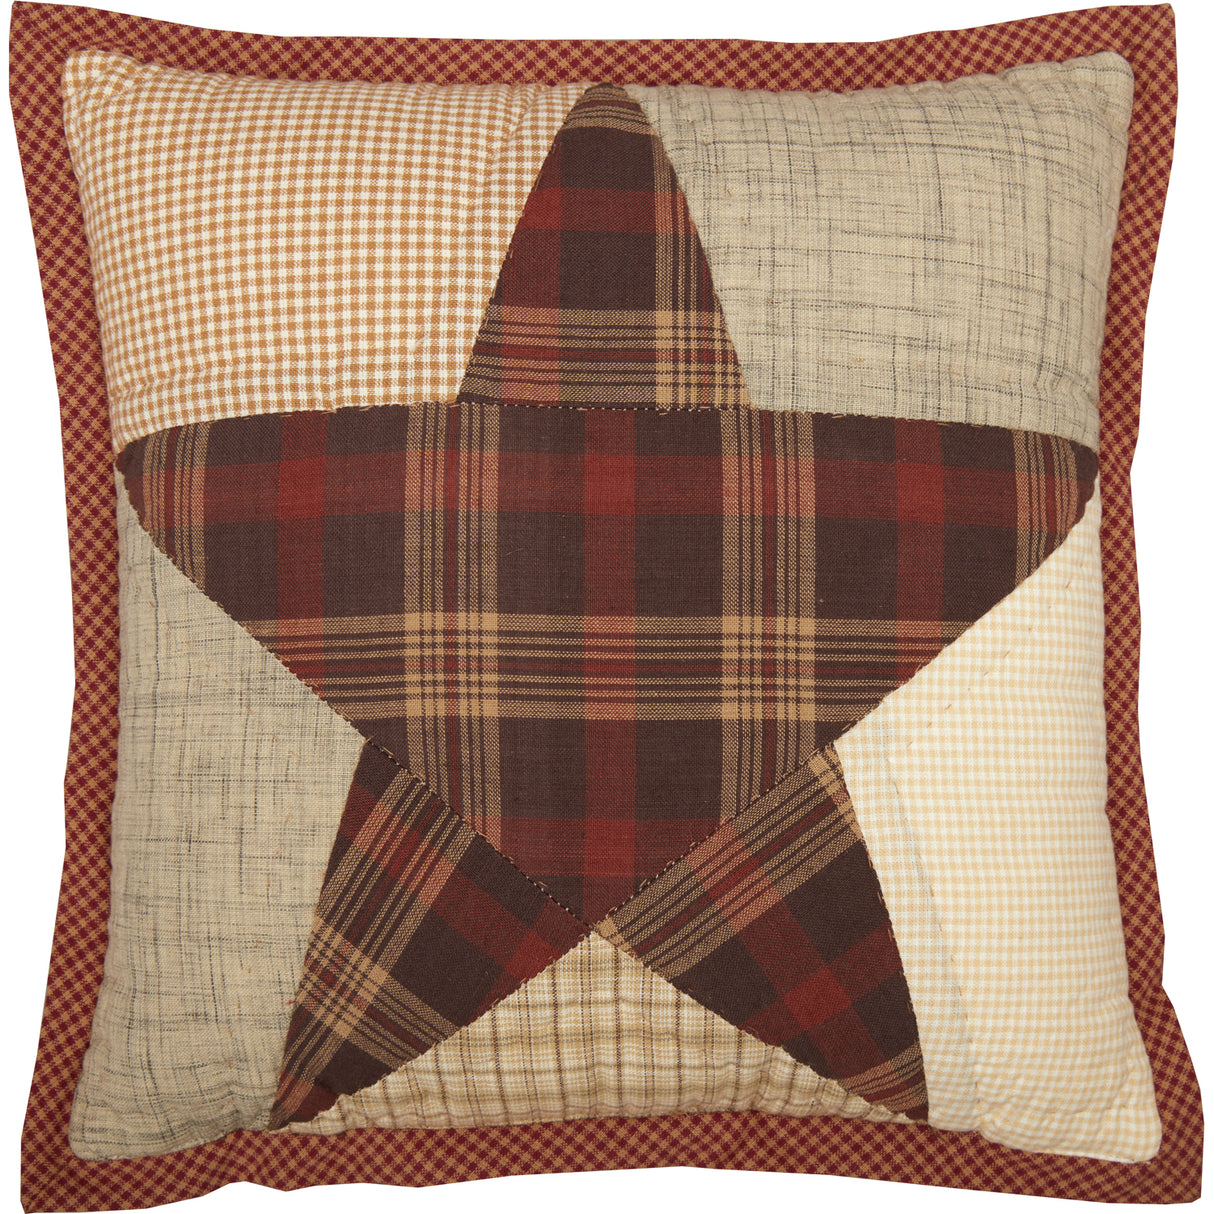 56622-Abilene-Star-Quilted-Pillow-12x12-image-4